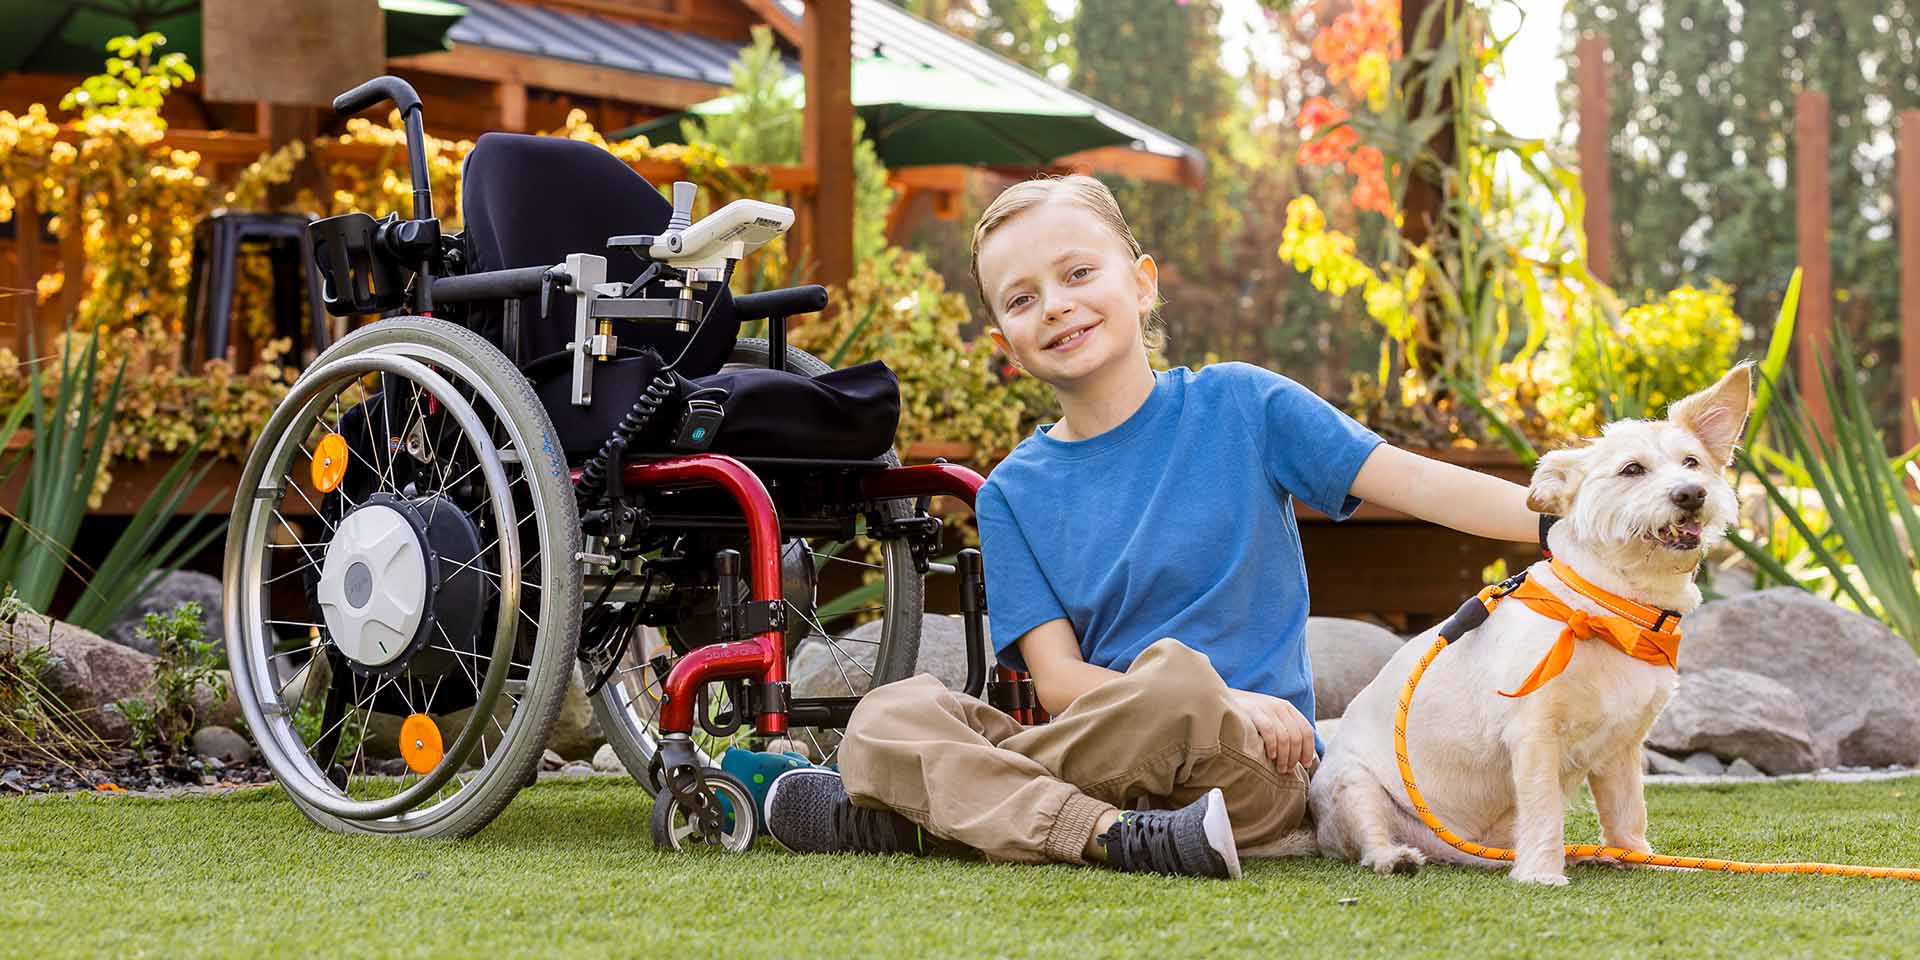 A boy sits on a grass lawn next to a wheelchair and a dog.